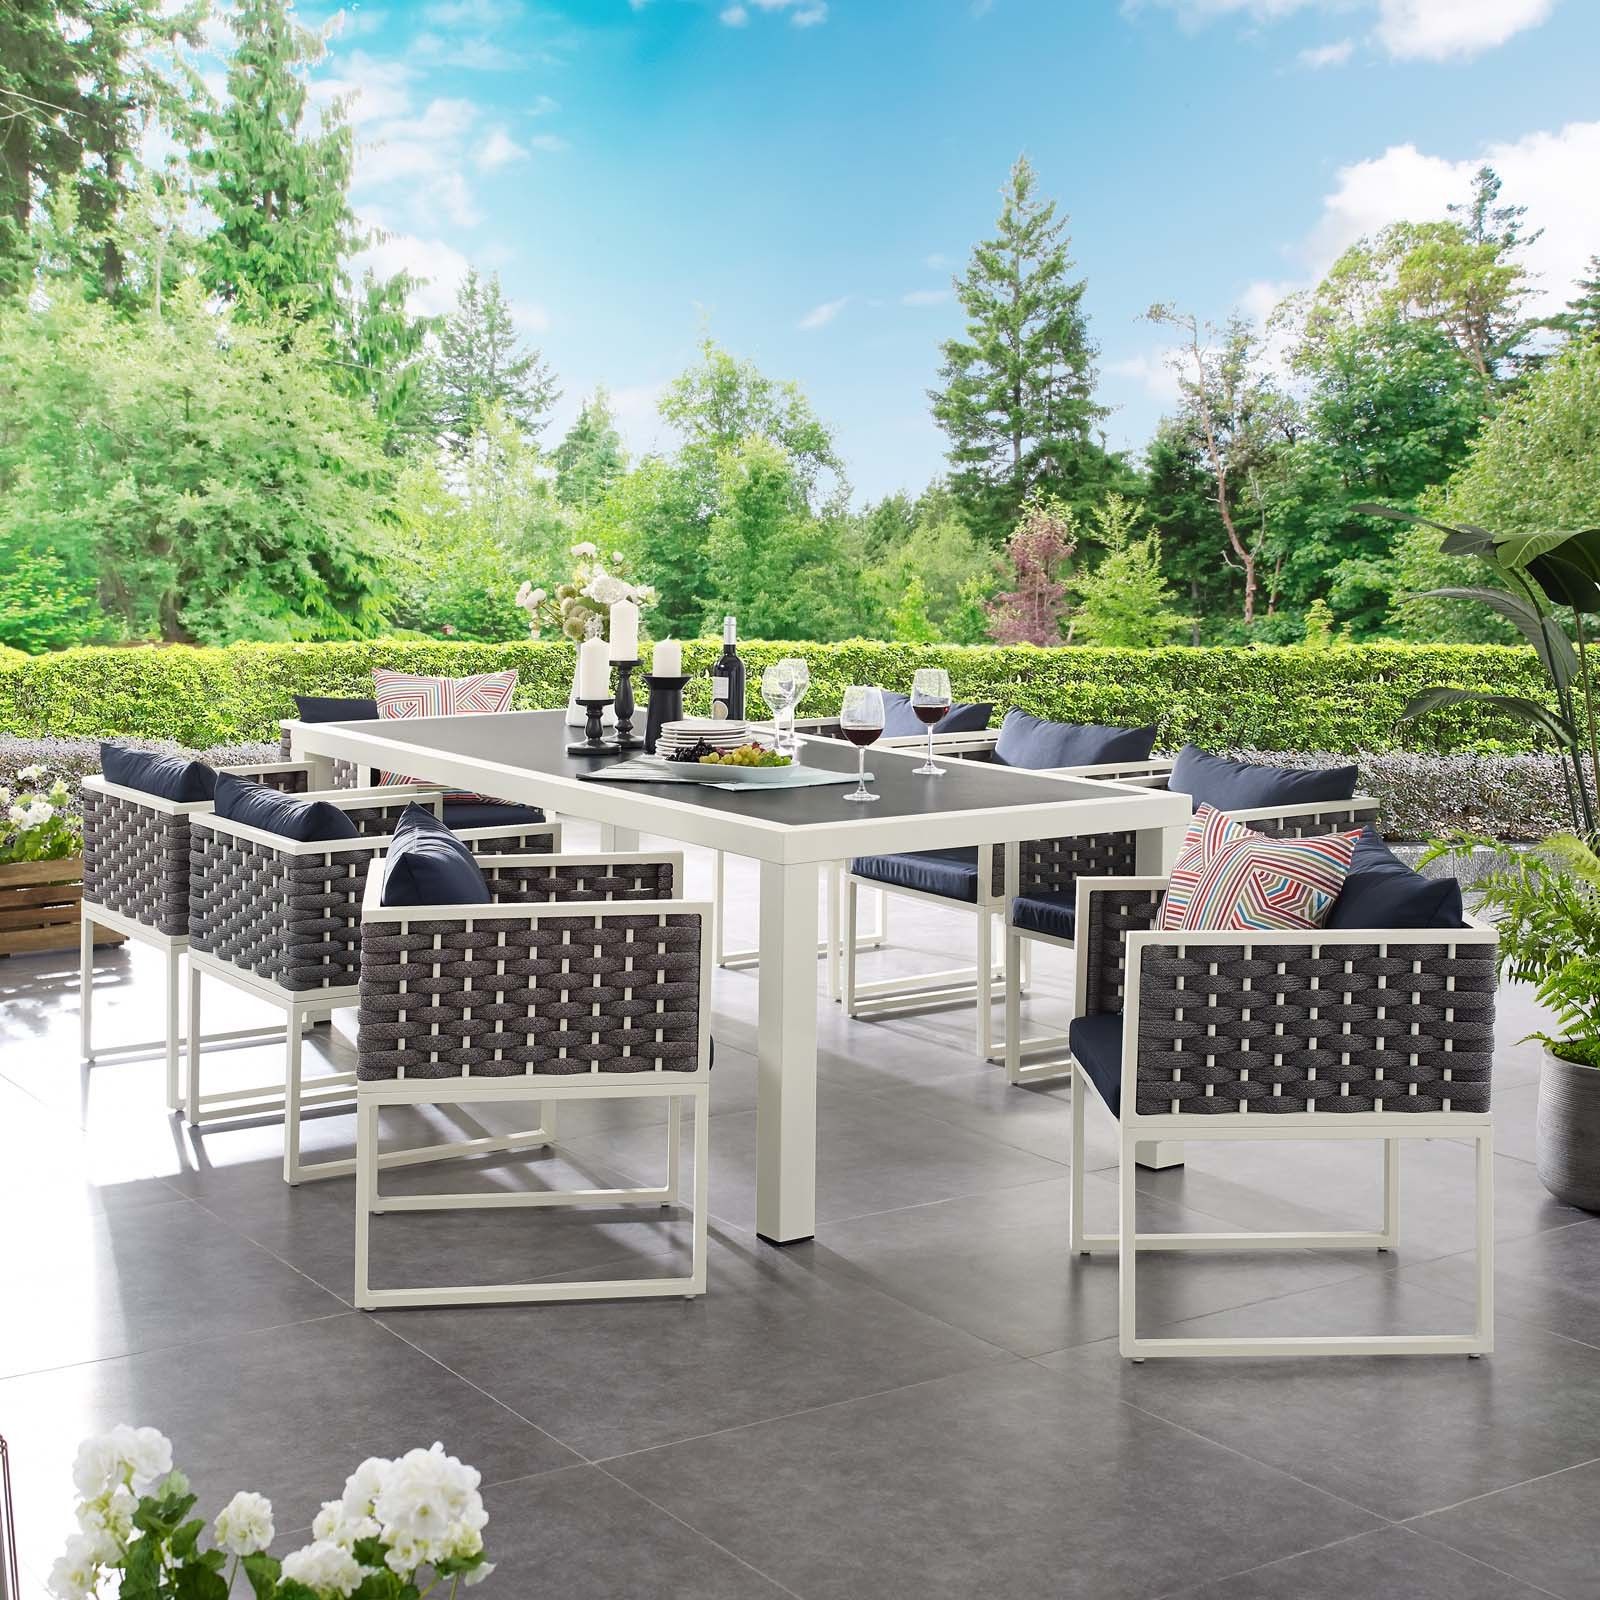 Stance White Navy 9 Piece Outdoor Patio Aluminum Dining Set Eei 3186 Pertaining To Most Up To Date Navy Outdoor Seating Sets (View 9 of 15)